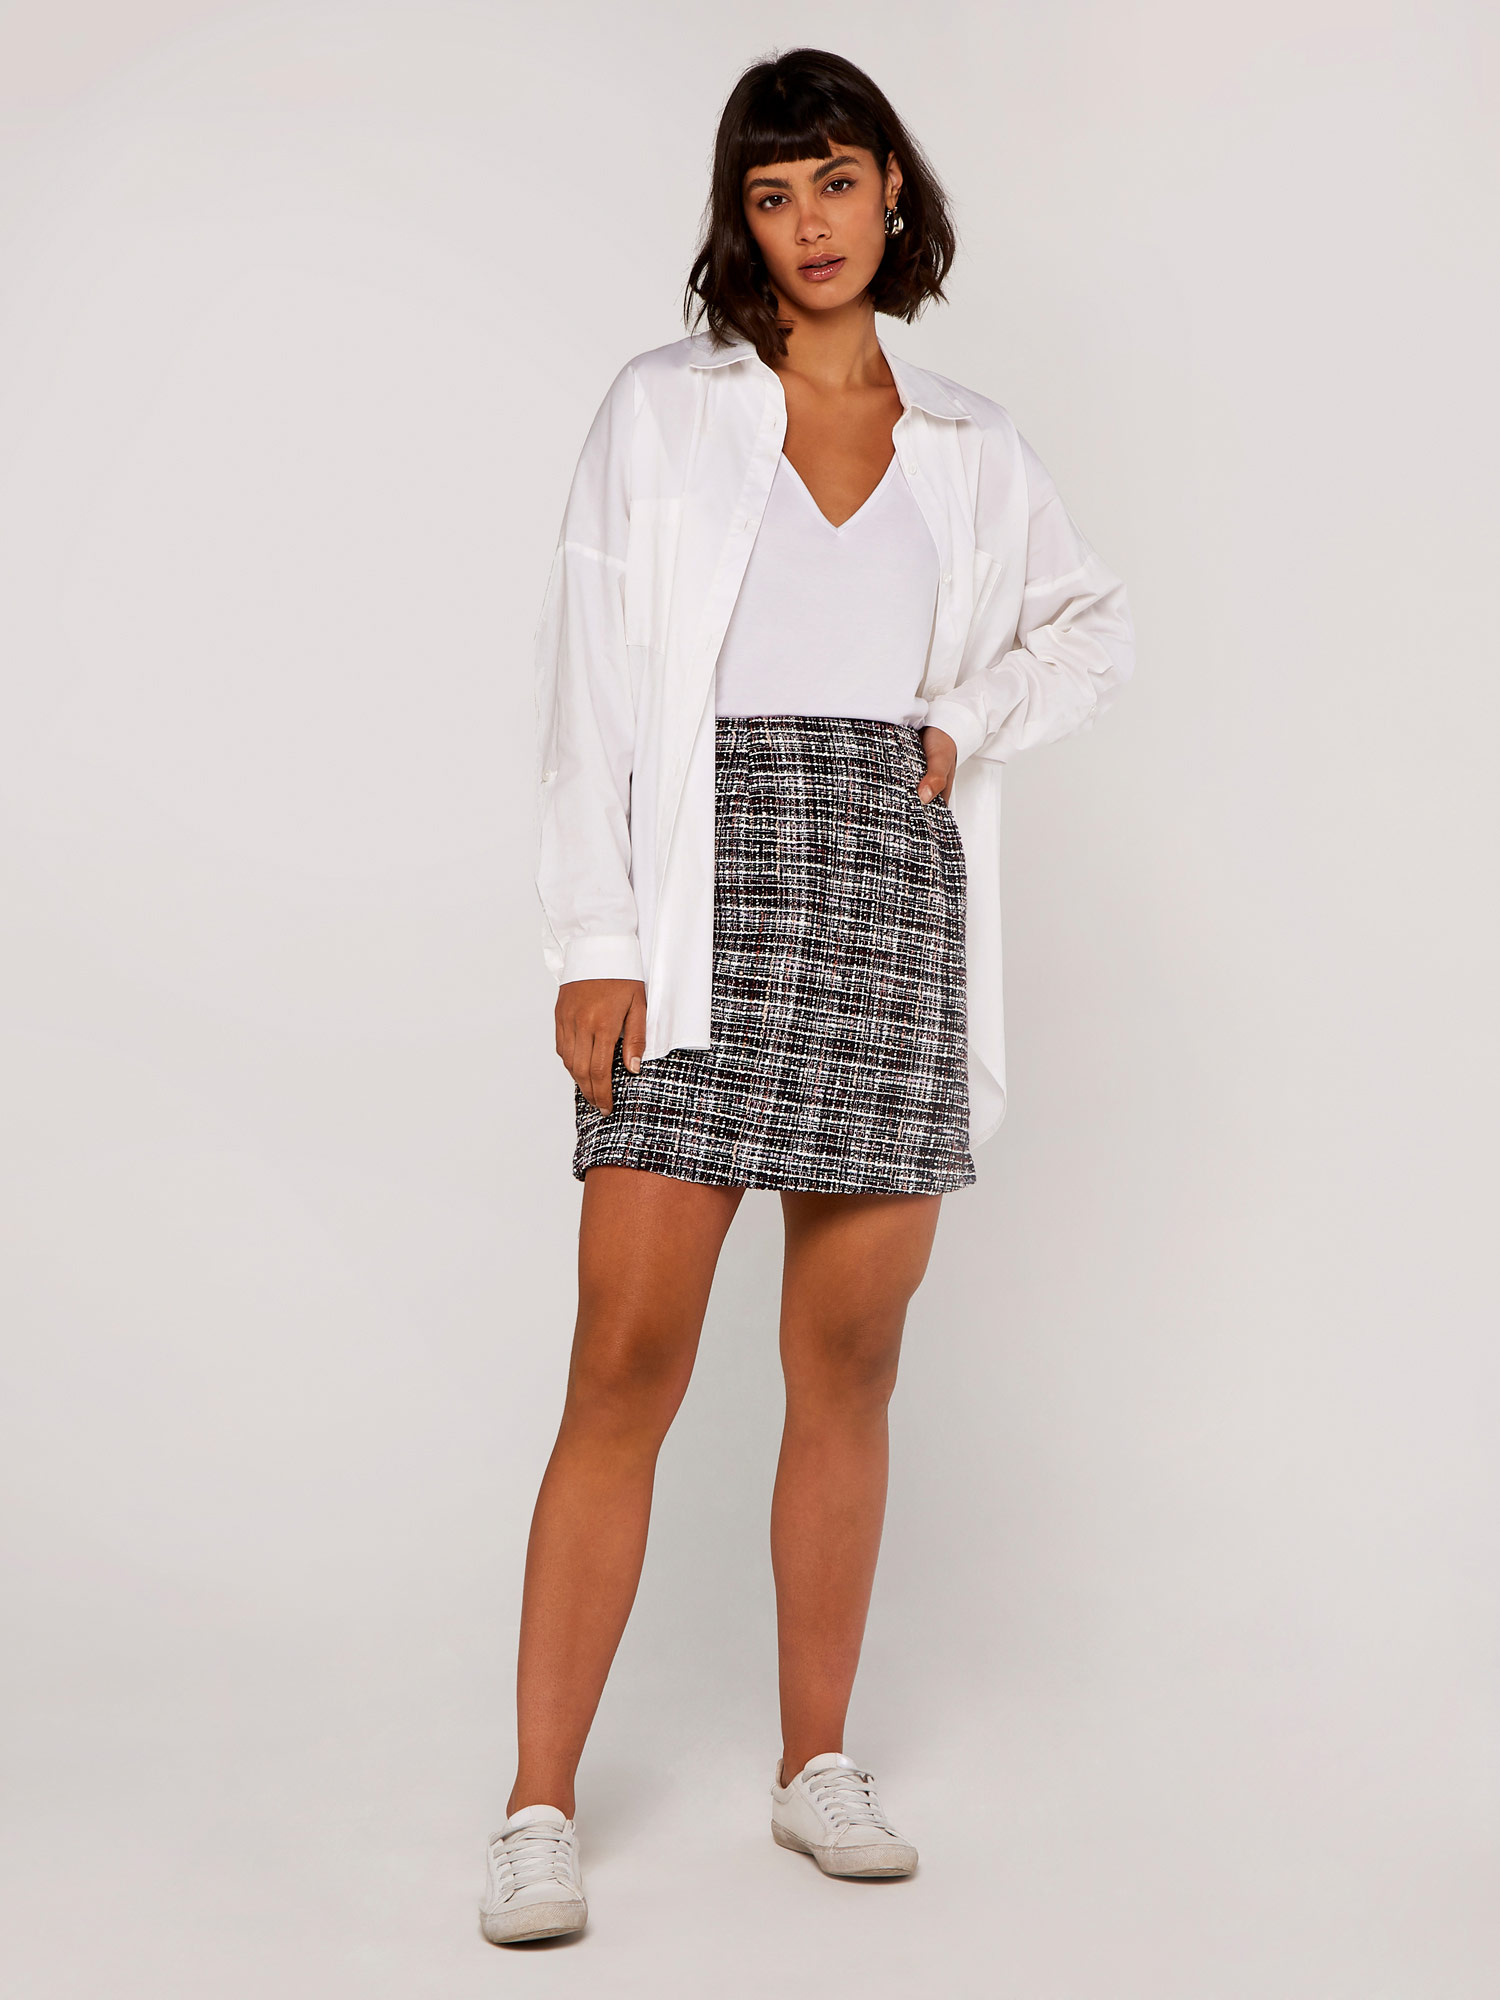 Woven Tweed Skirt | Apricot Clothing